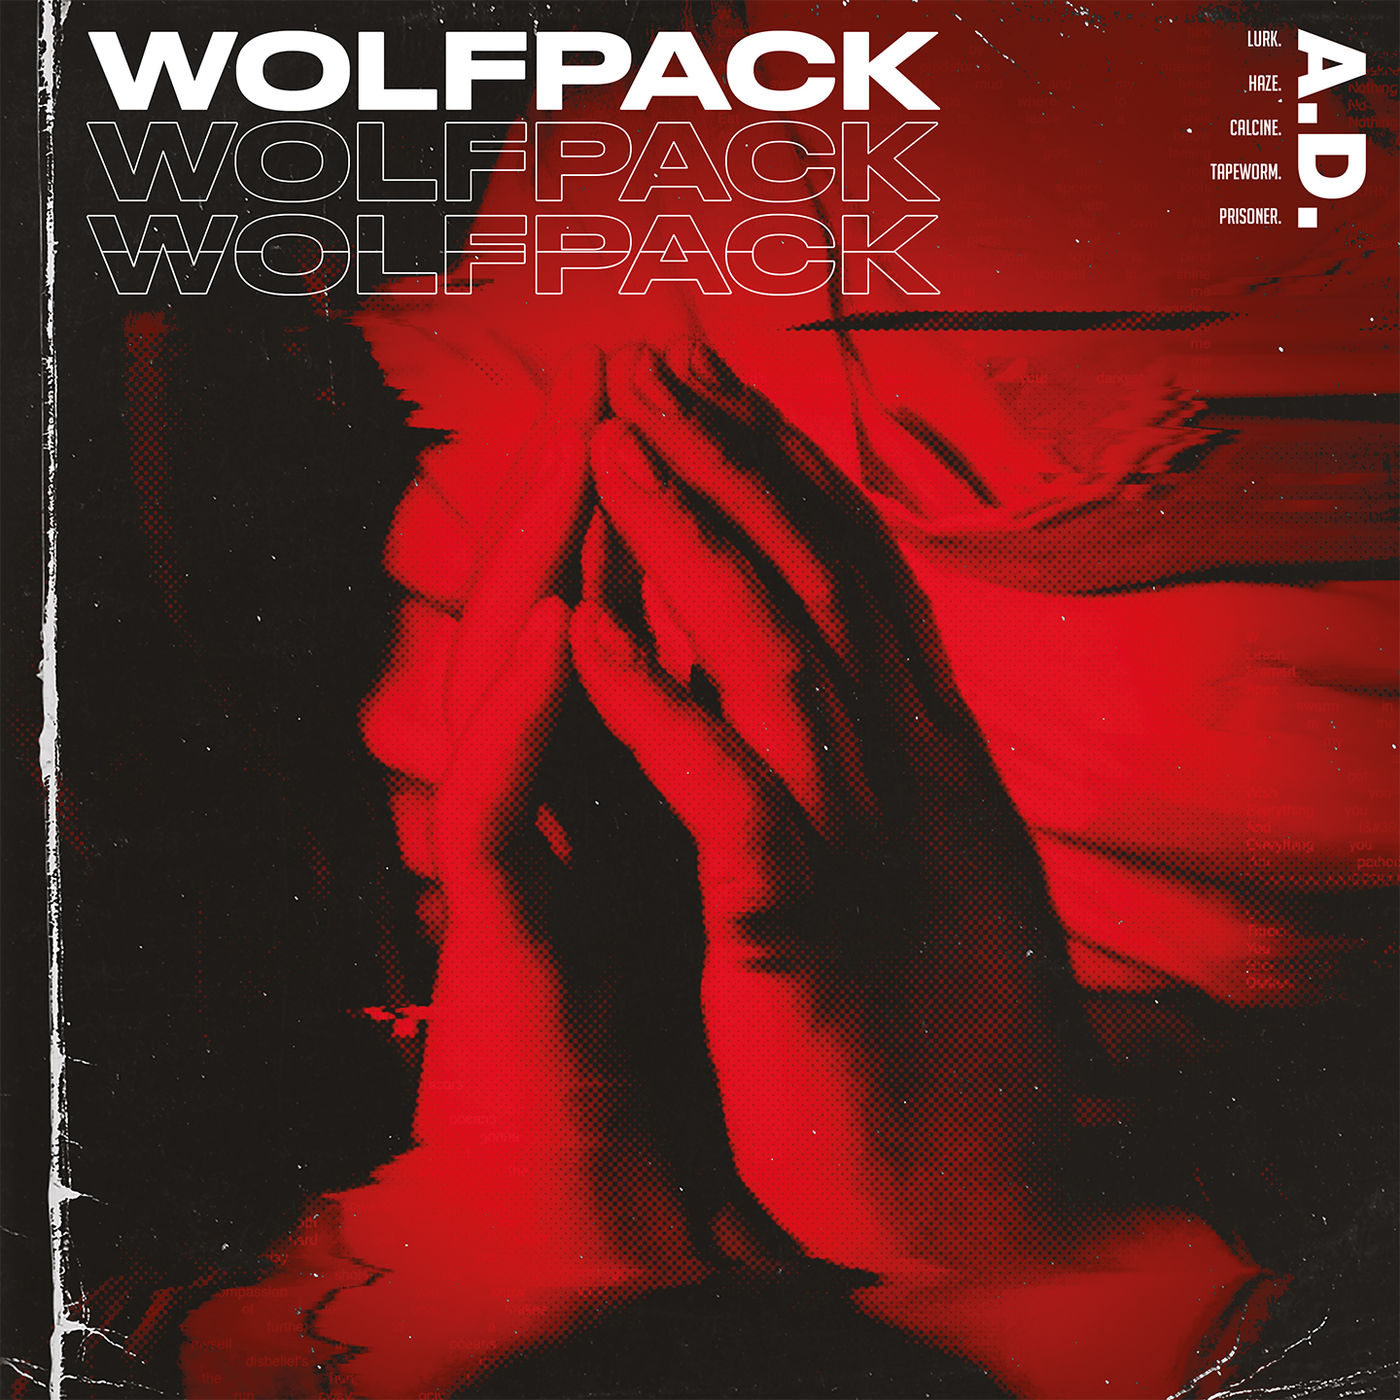 Wolfpack – A.D.